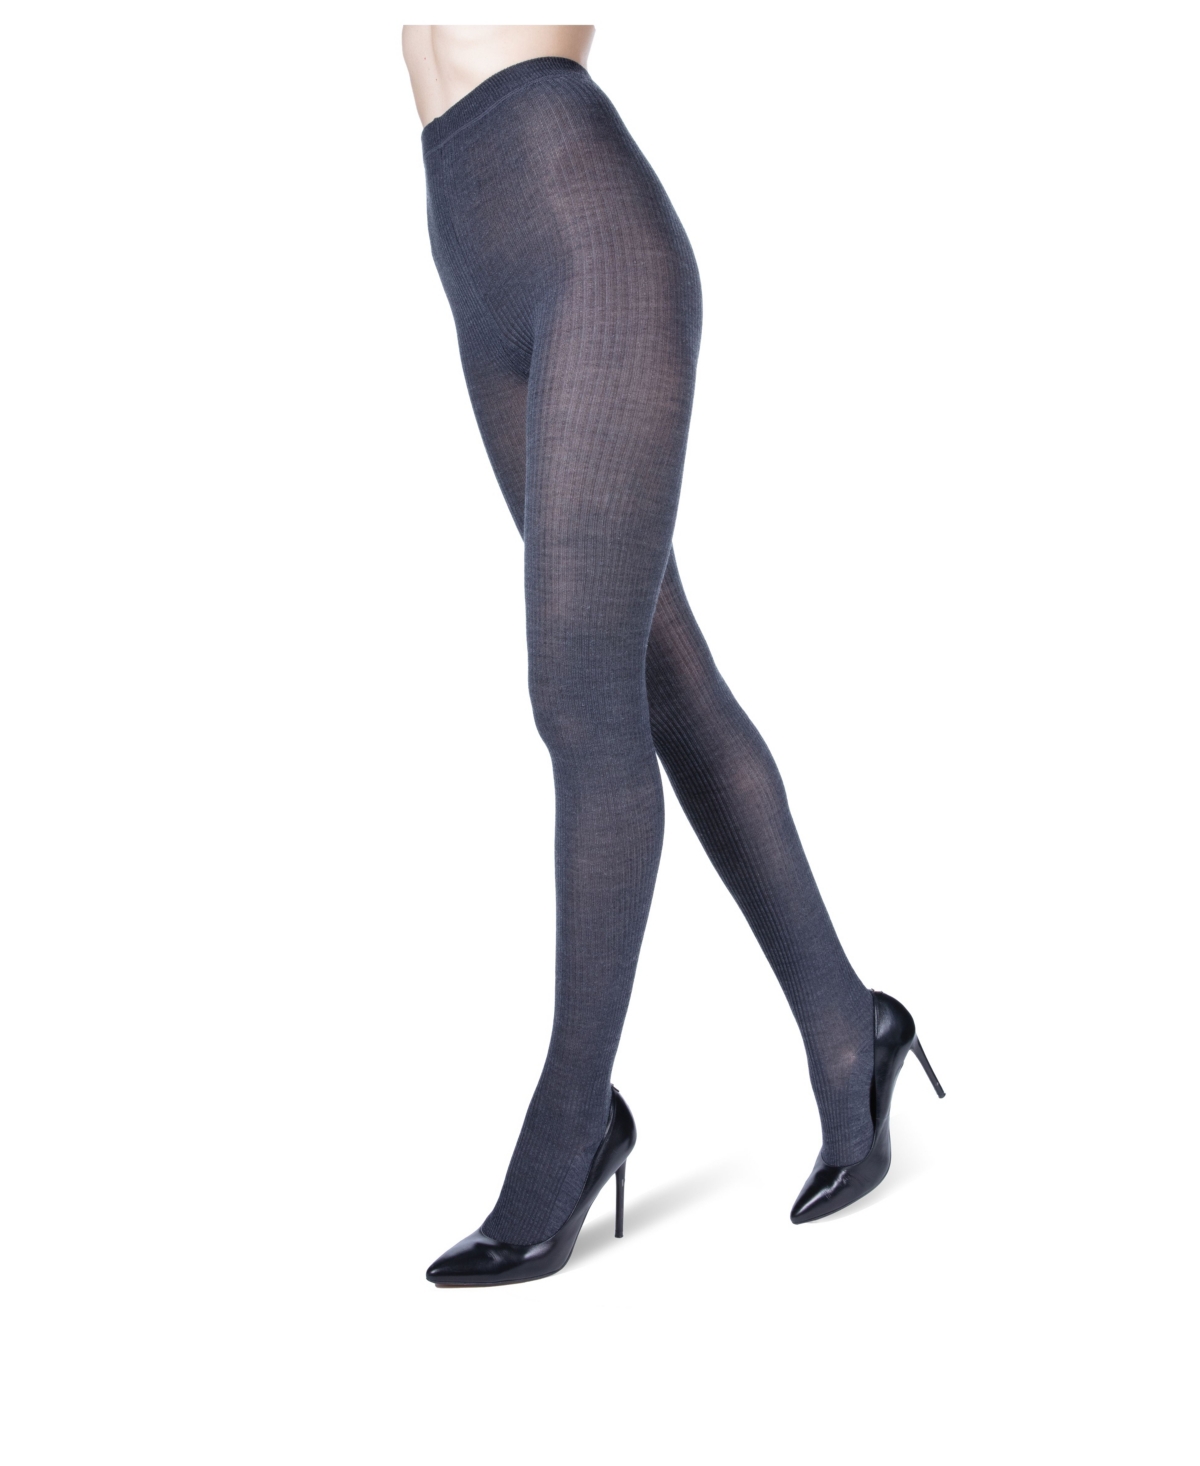 Women's Merino Woolor Blend Ribbed Tights - Black